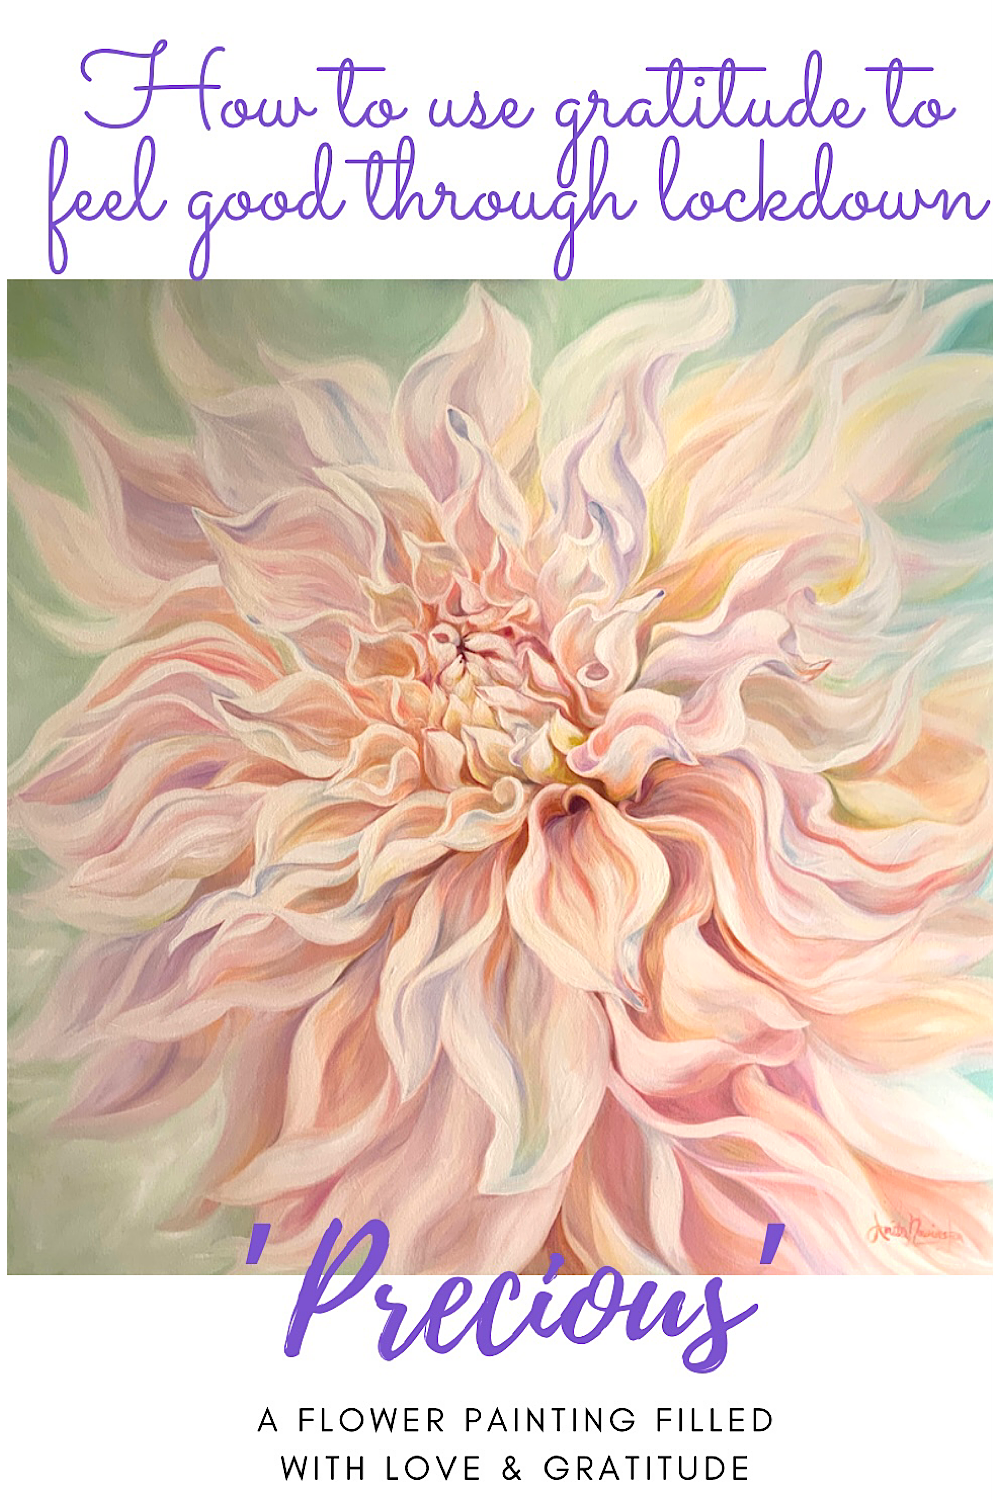 how to use gratitude to eel good during lockdown- dahlia lower painting full of love